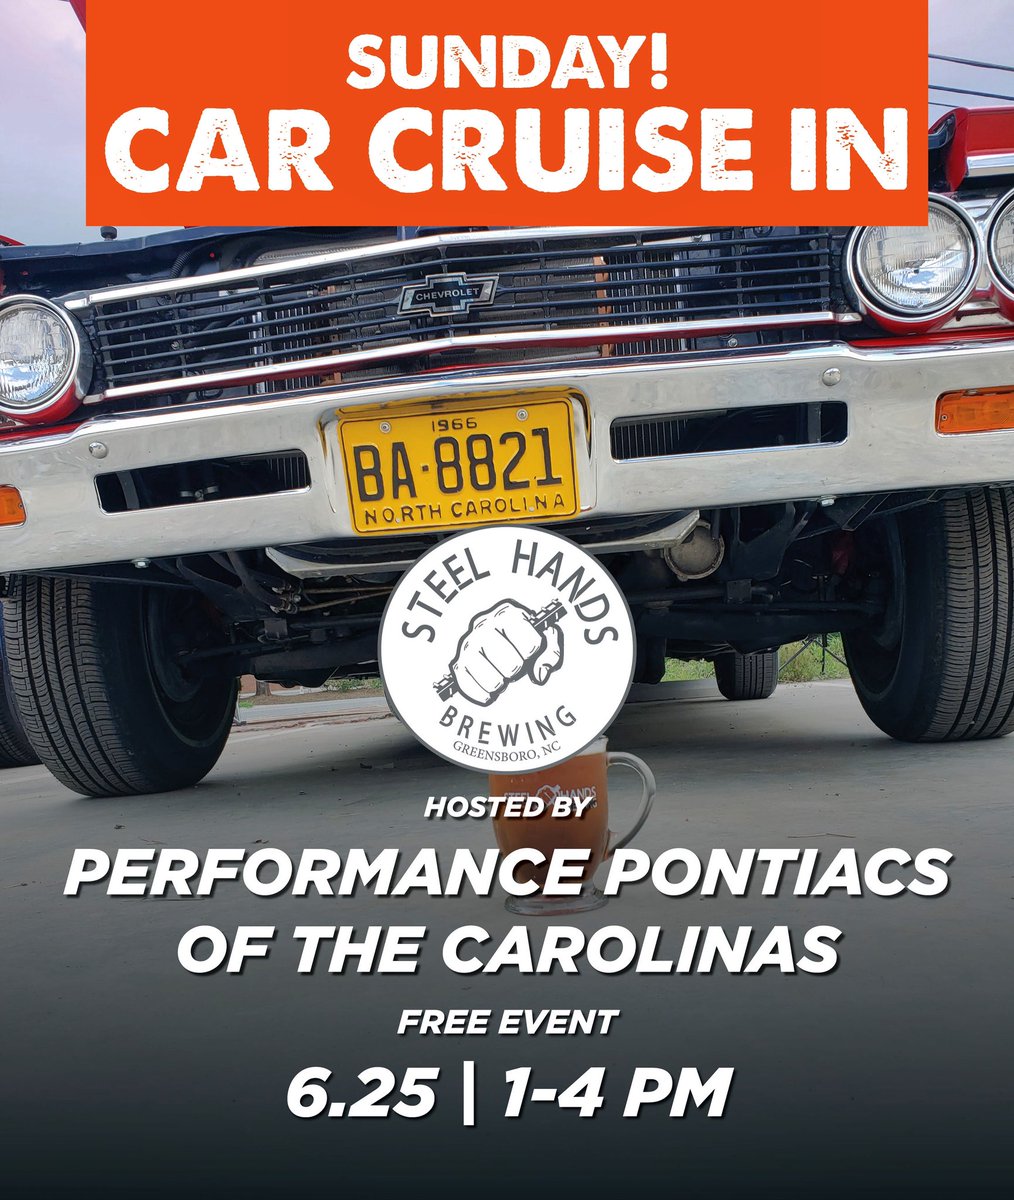 TODAY | 1-4PM 📣 Calling all Classic American 💪 muscle cars! Cruise In 🚘hosted by Performance Pontiacs of the Carolinas!
.
#cars #classics #hotrods #musclecars #engines #carshow #cruisein #outdoors #sunday #events #taproom #greensboro #triad #winstonsalem #highpoint